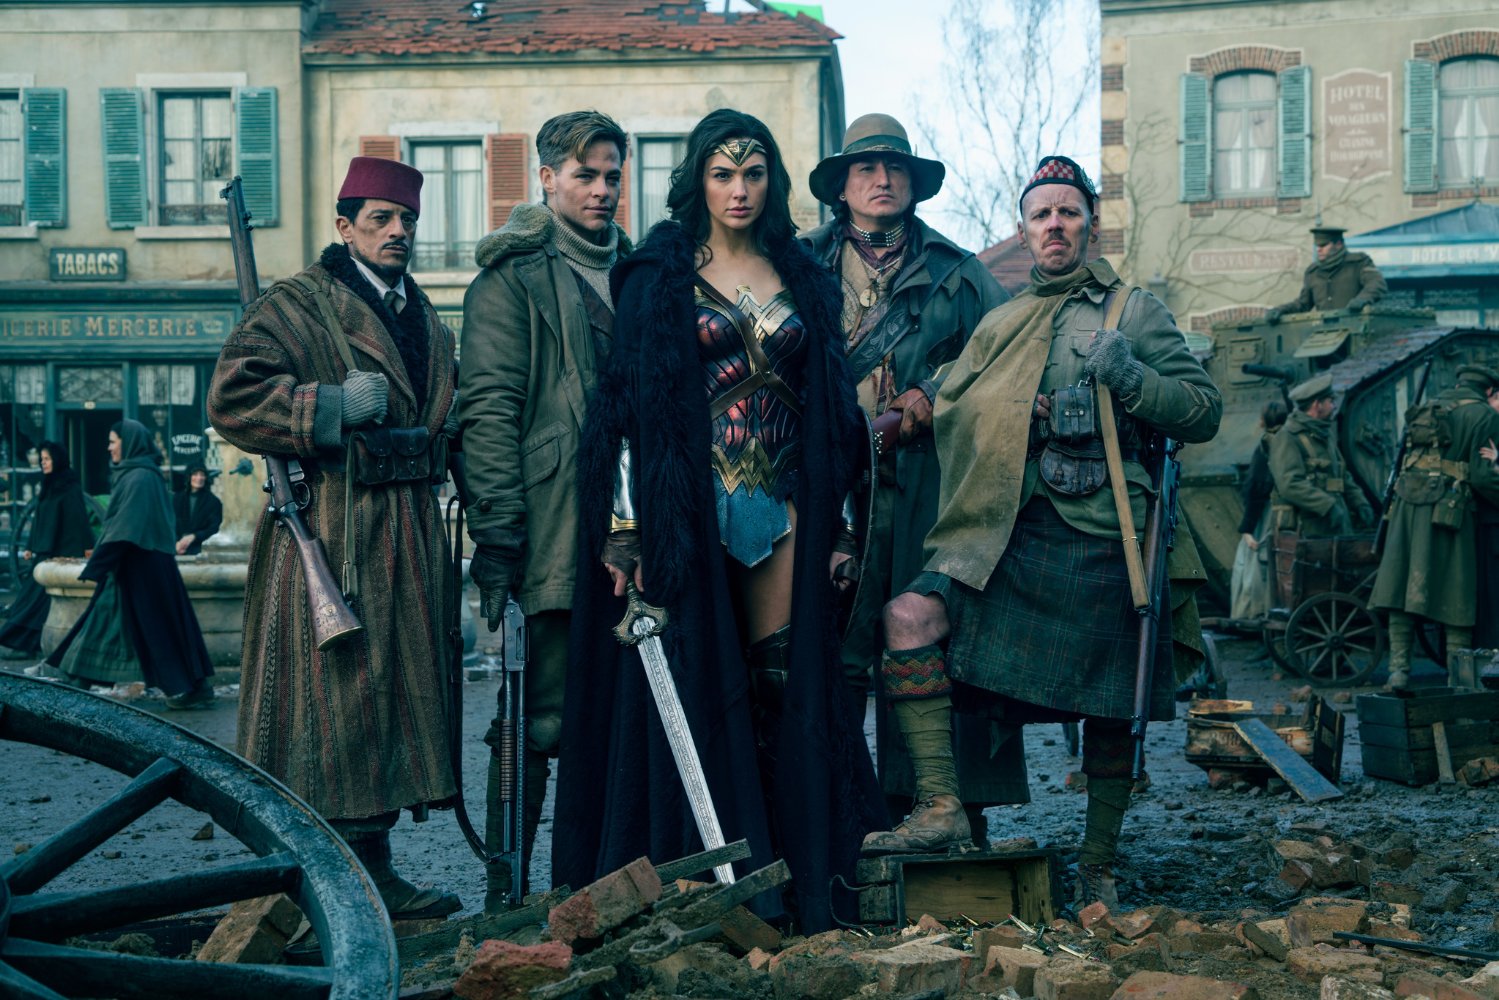 WONDER WOMAN Is Successful… At Least Compared to What Preceded It